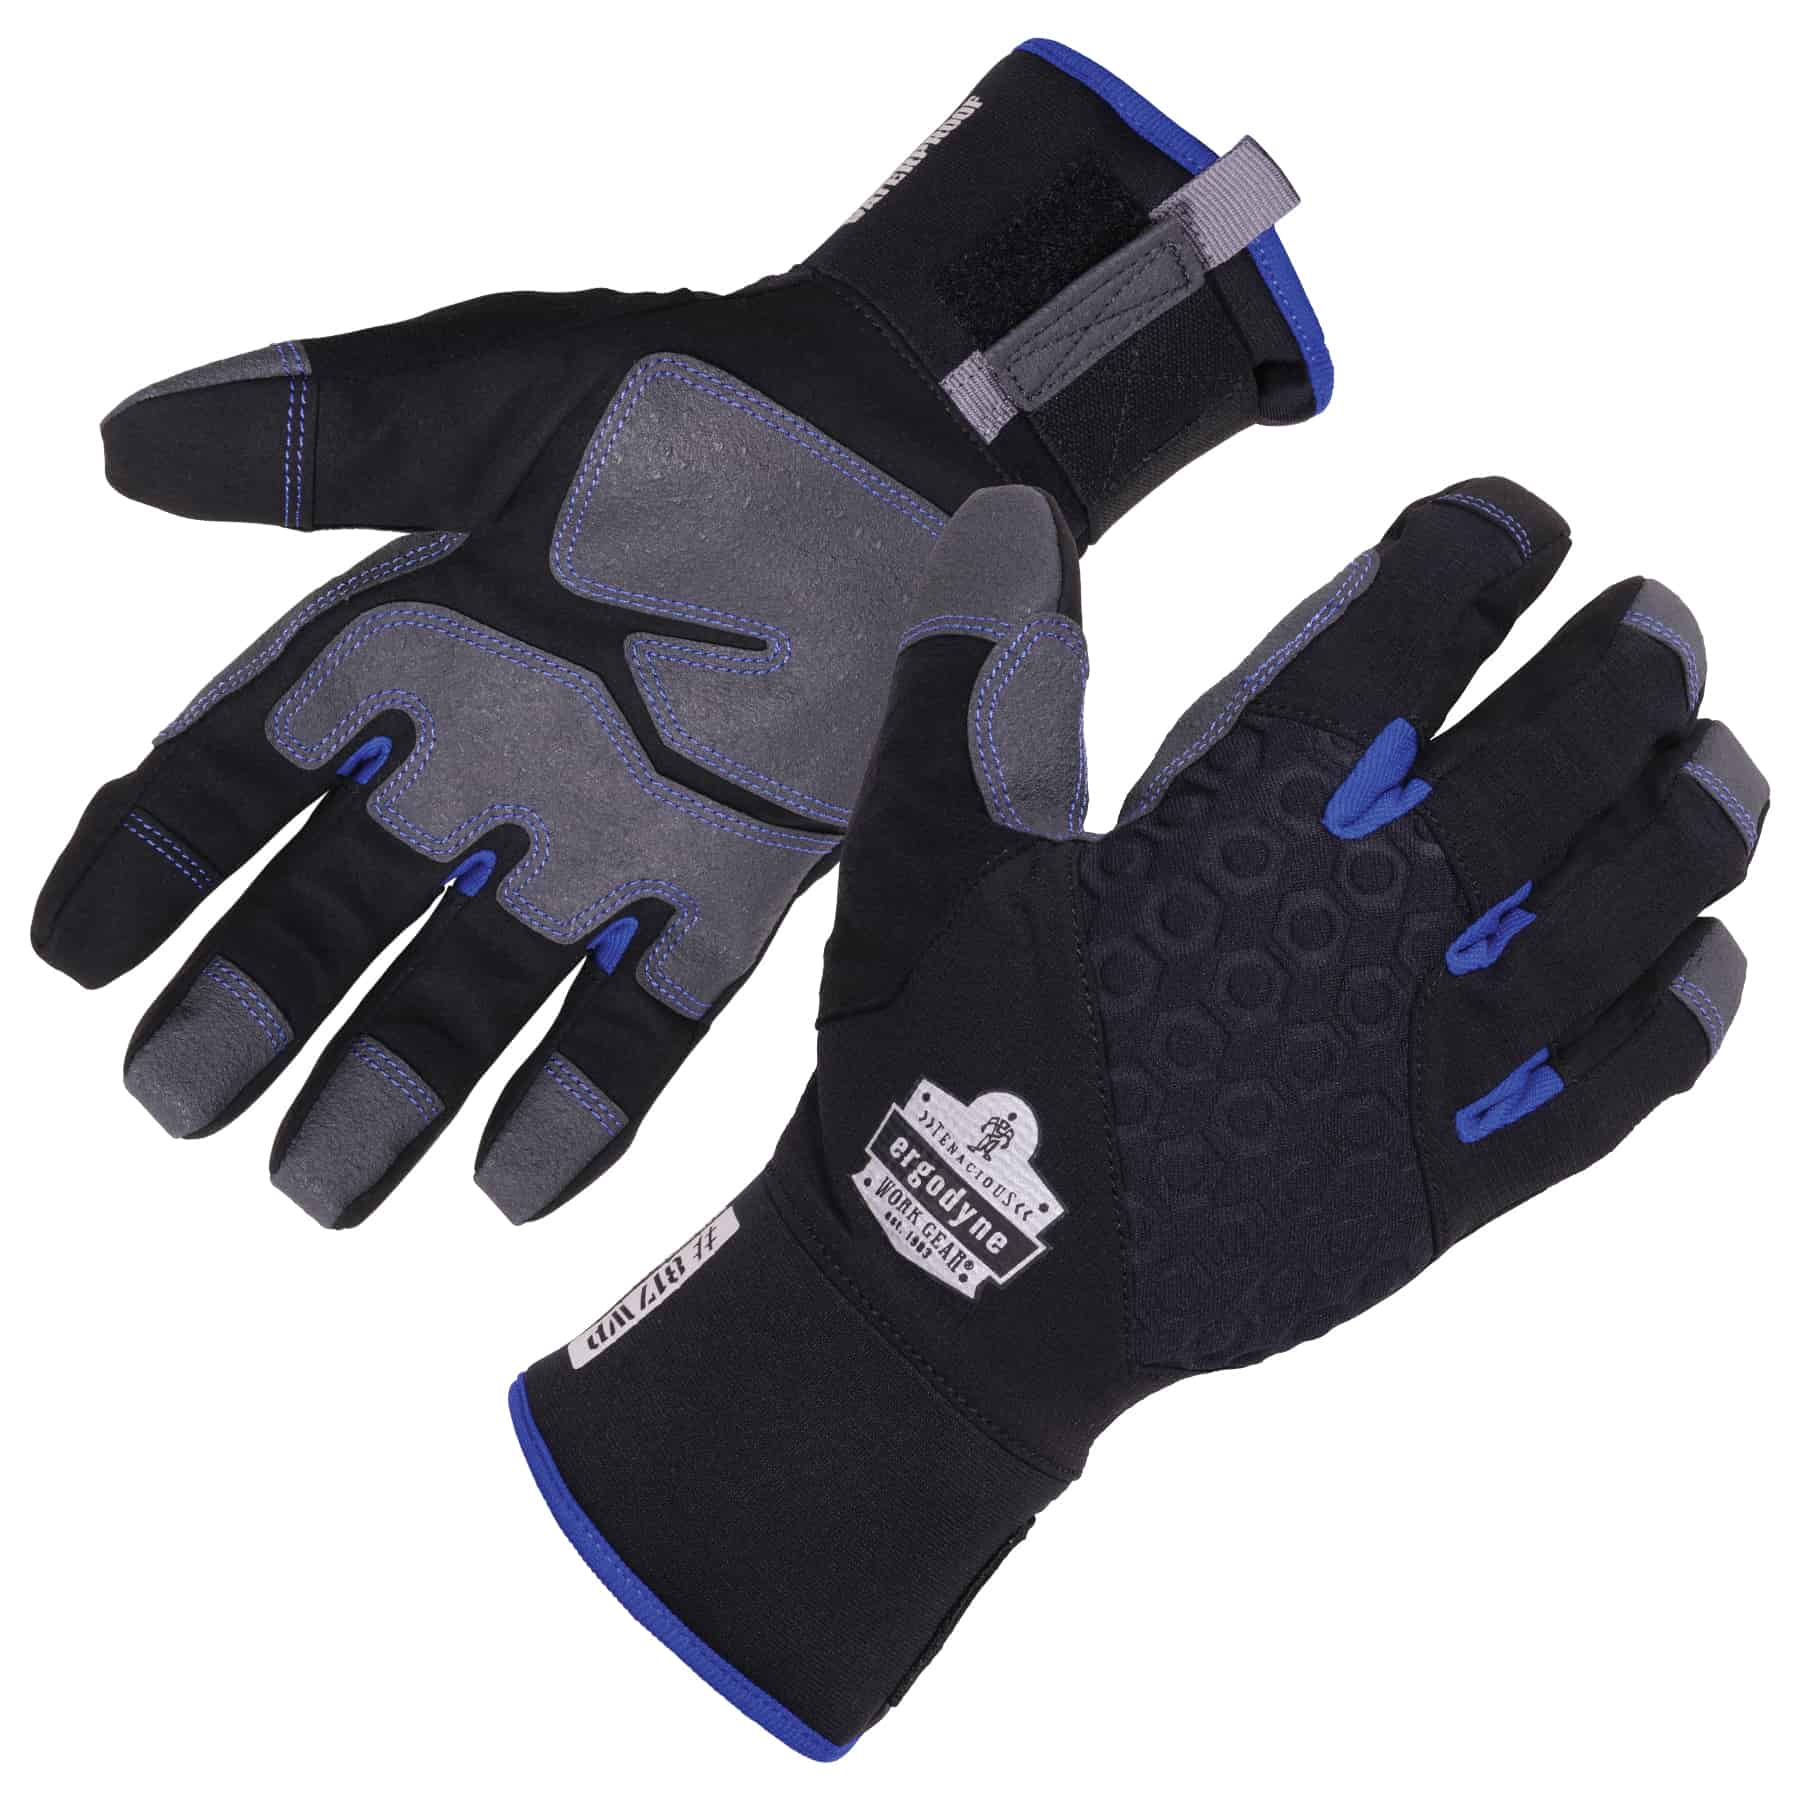 PROFLEX 817WP THERMAL WATERPROOF GLOVES - Lysol Disinfectant Spray